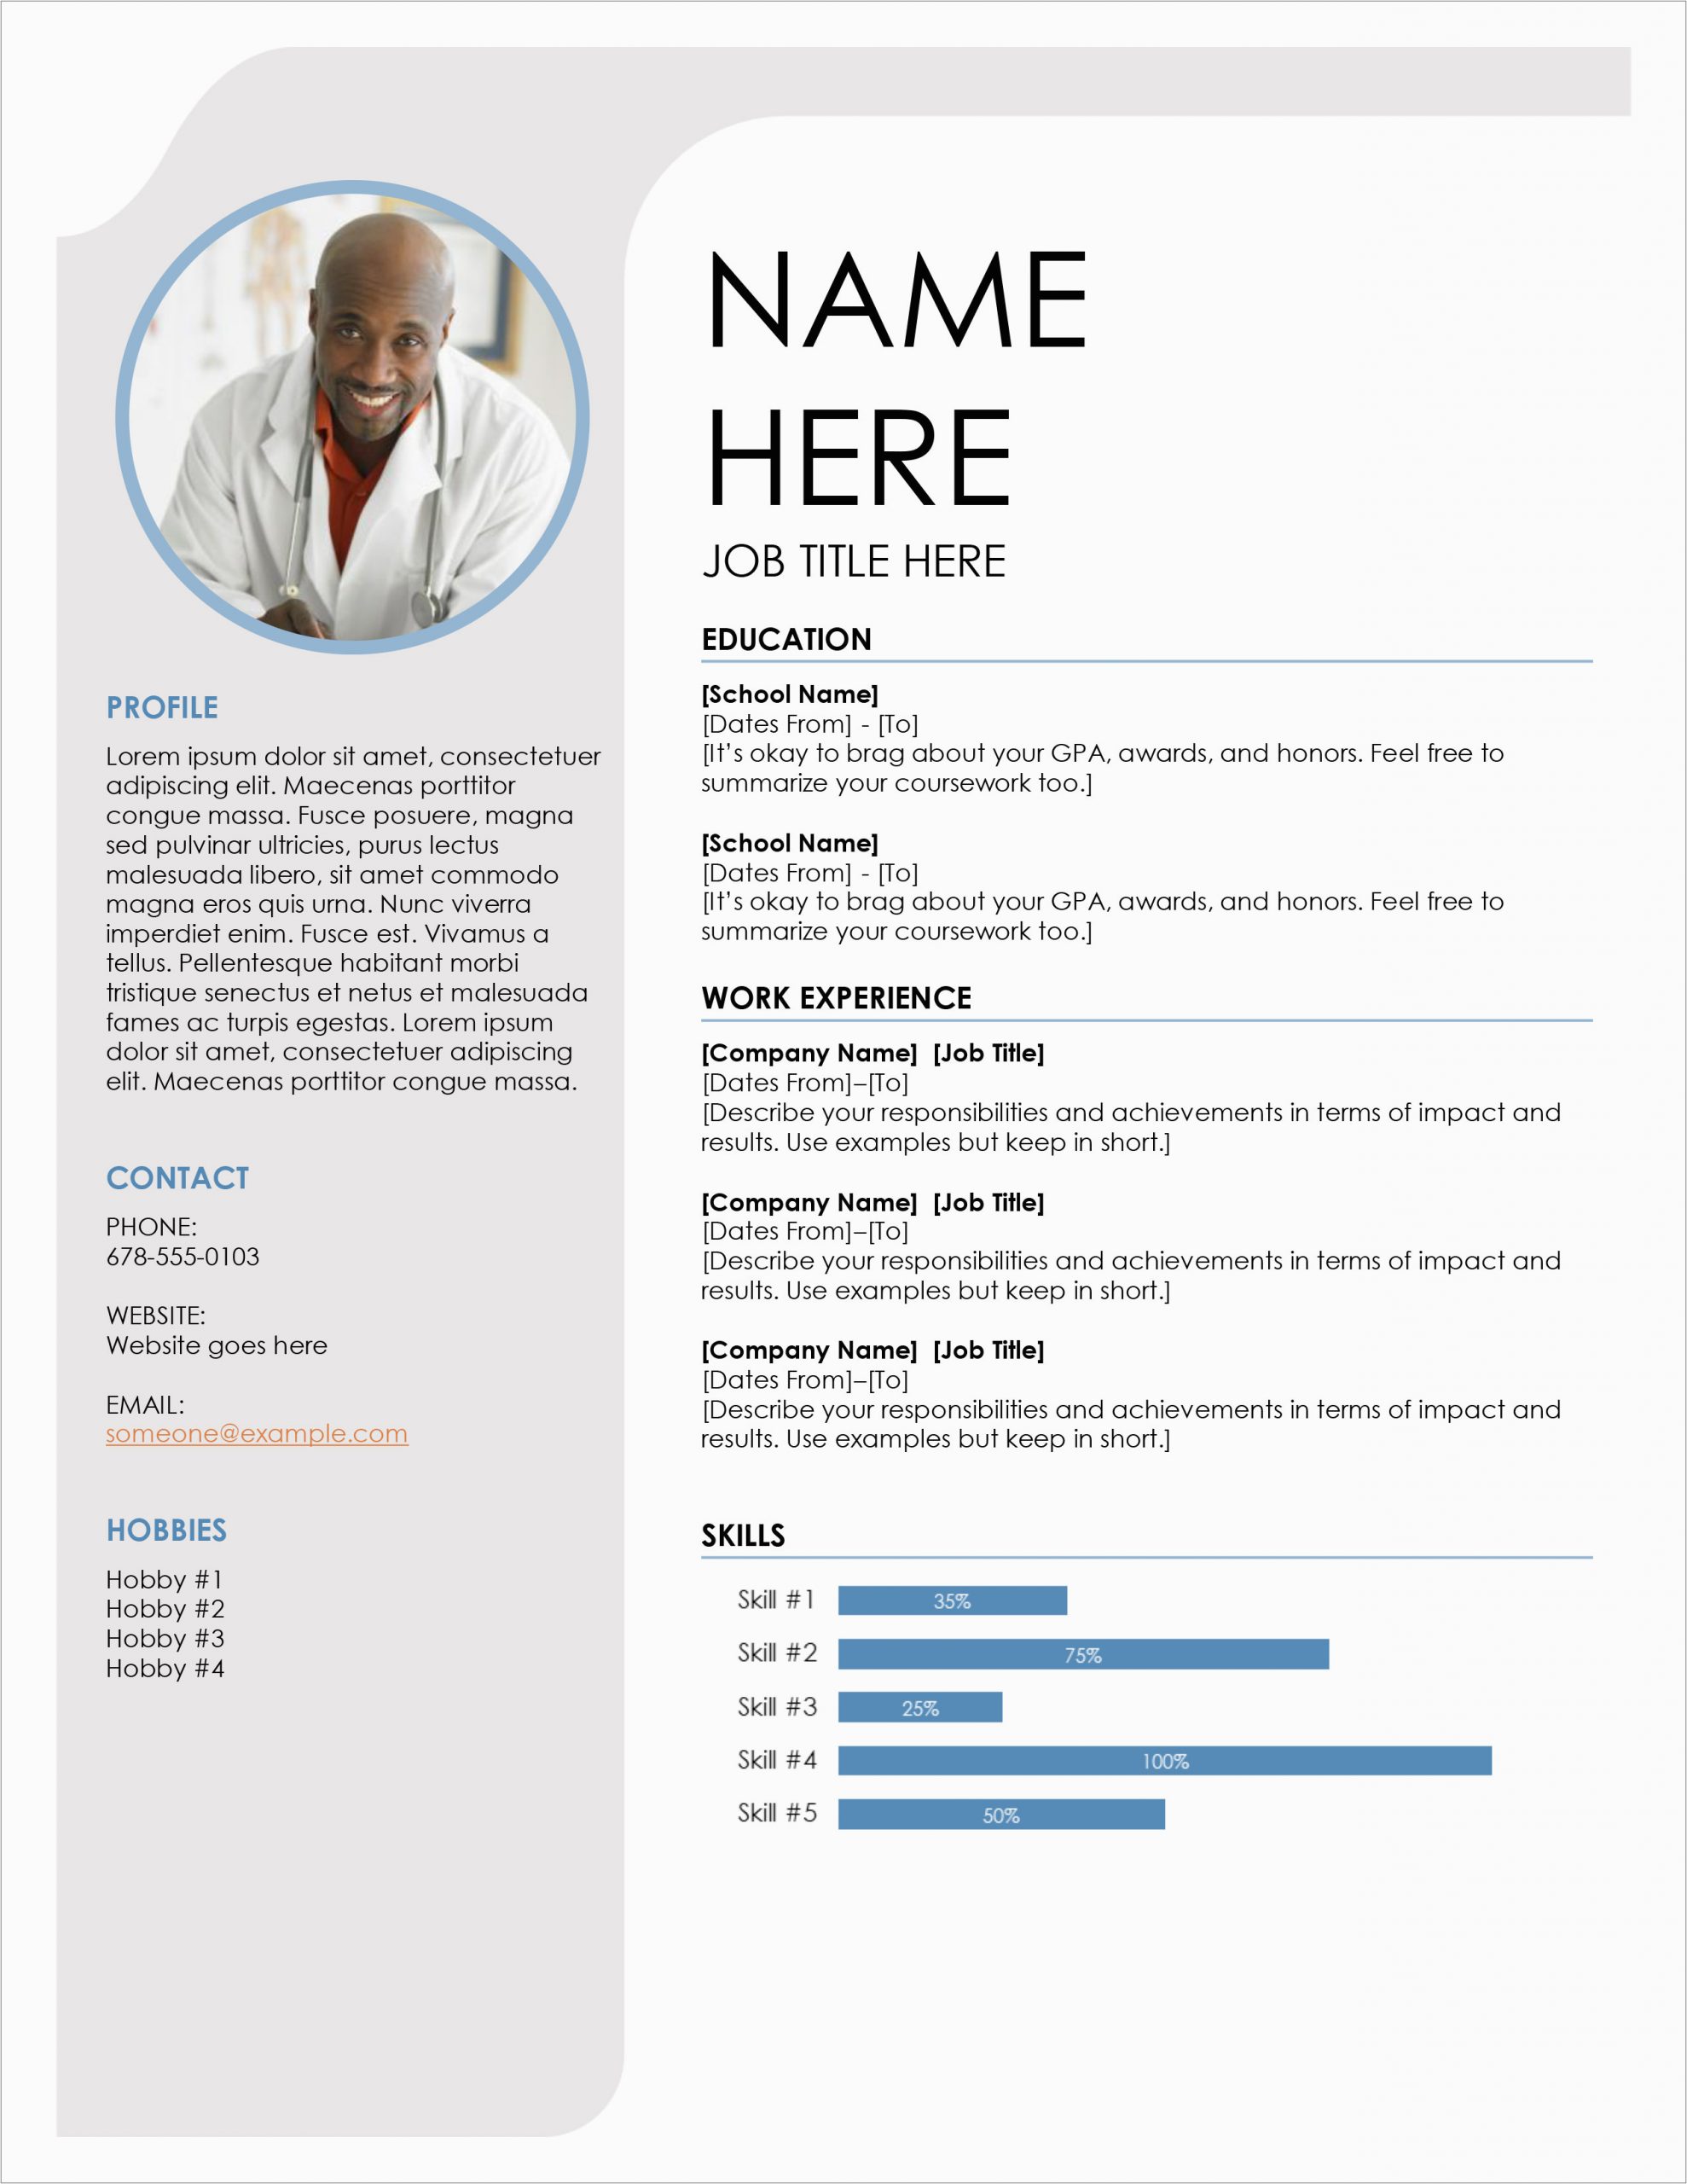 Resume with Photo Template Free Download Word Document Resume Template Free 50 Resume Templates